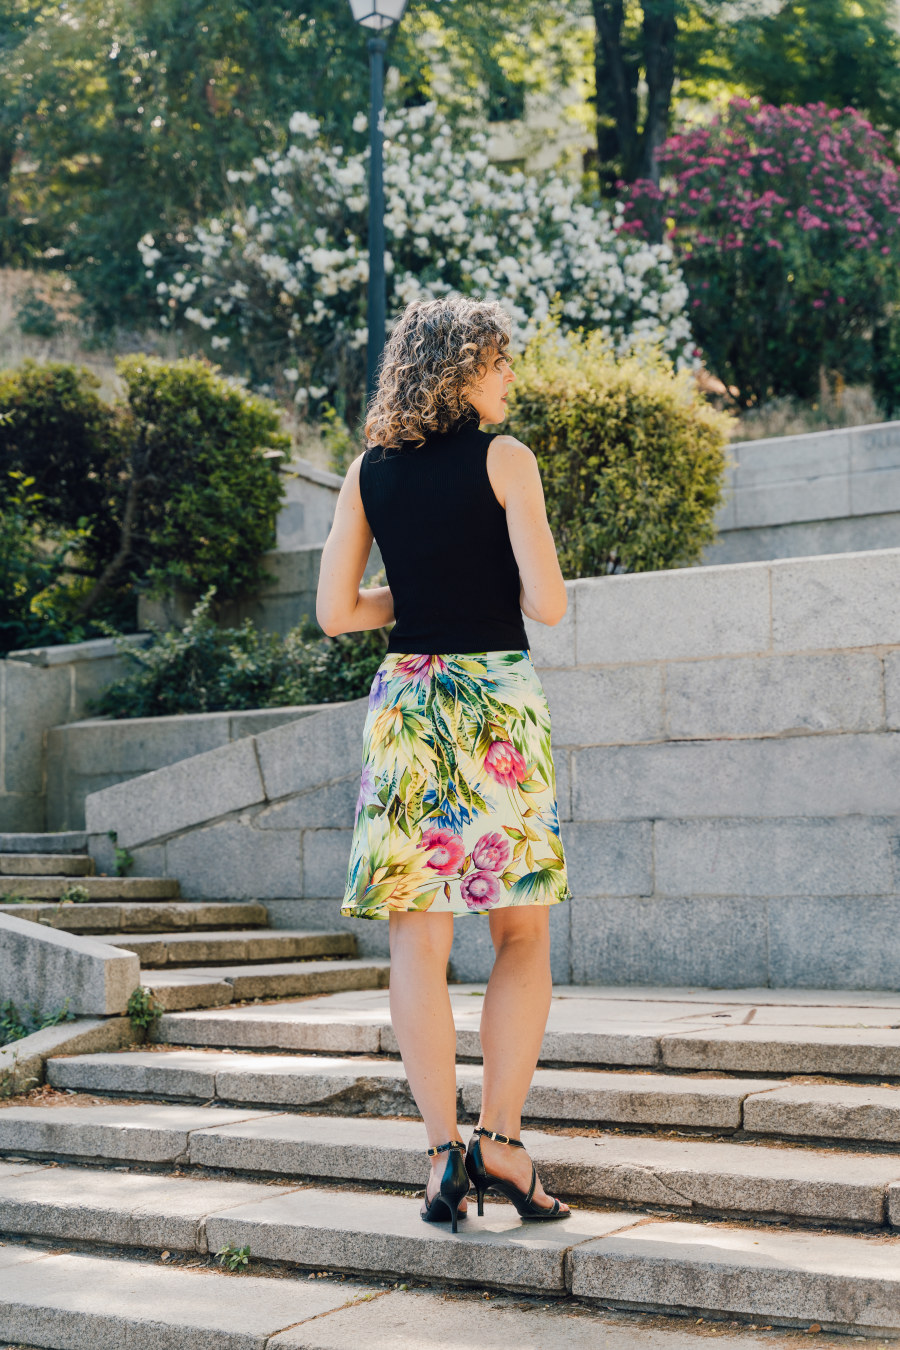 Introducing the New Garibaldi a-Line Skirt Sewing Pattern